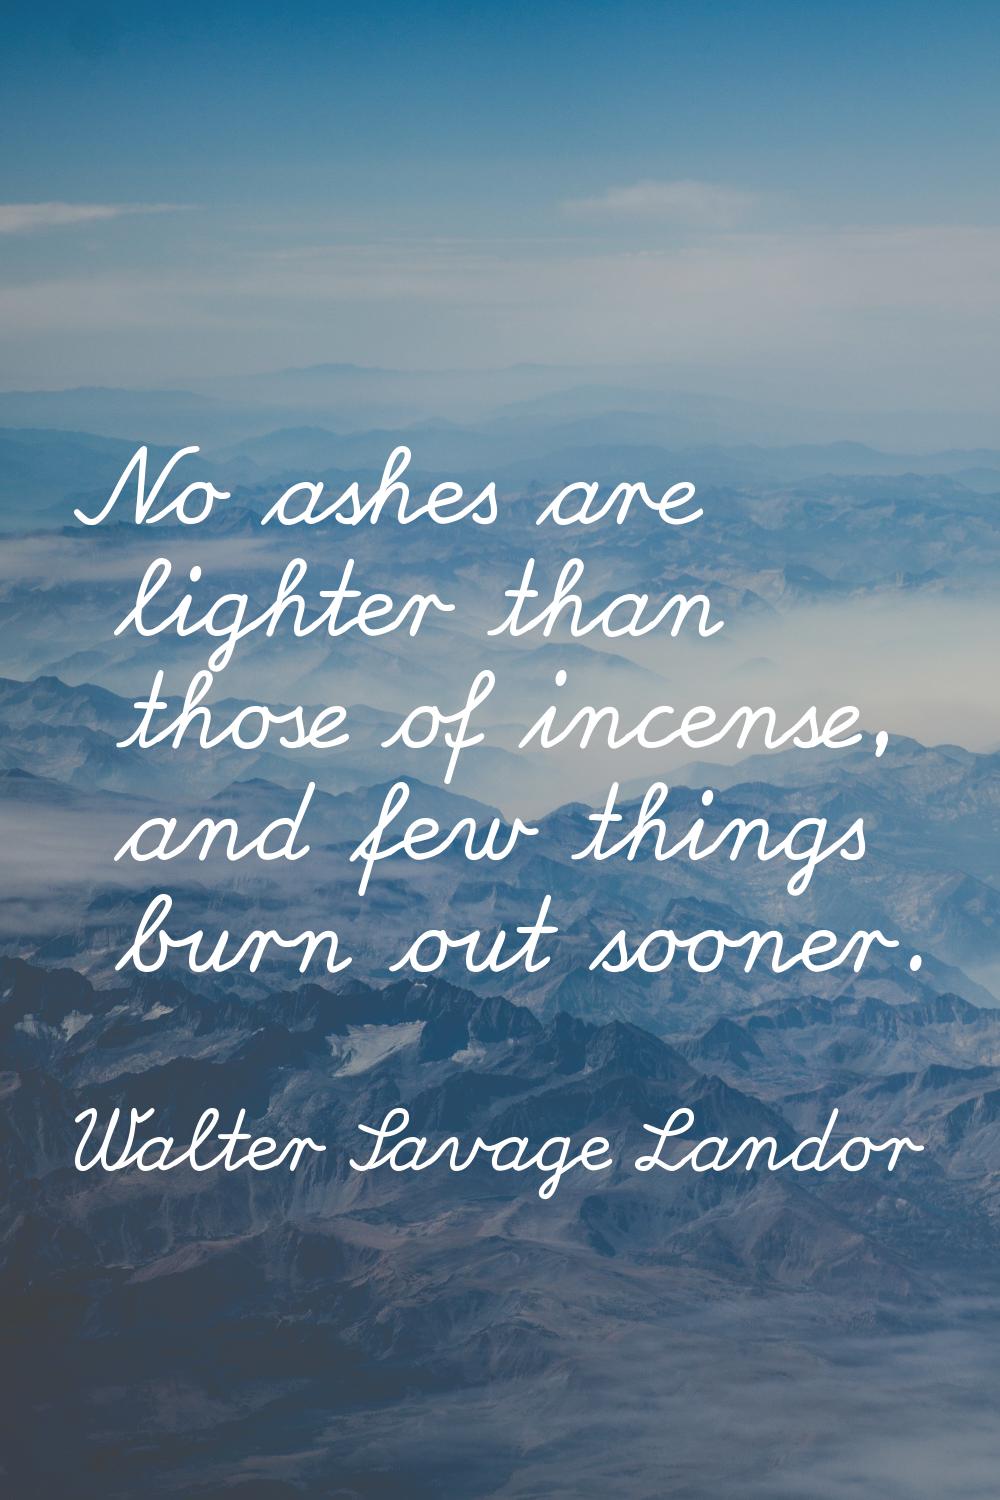 No ashes are lighter than those of incense, and few things burn out sooner.